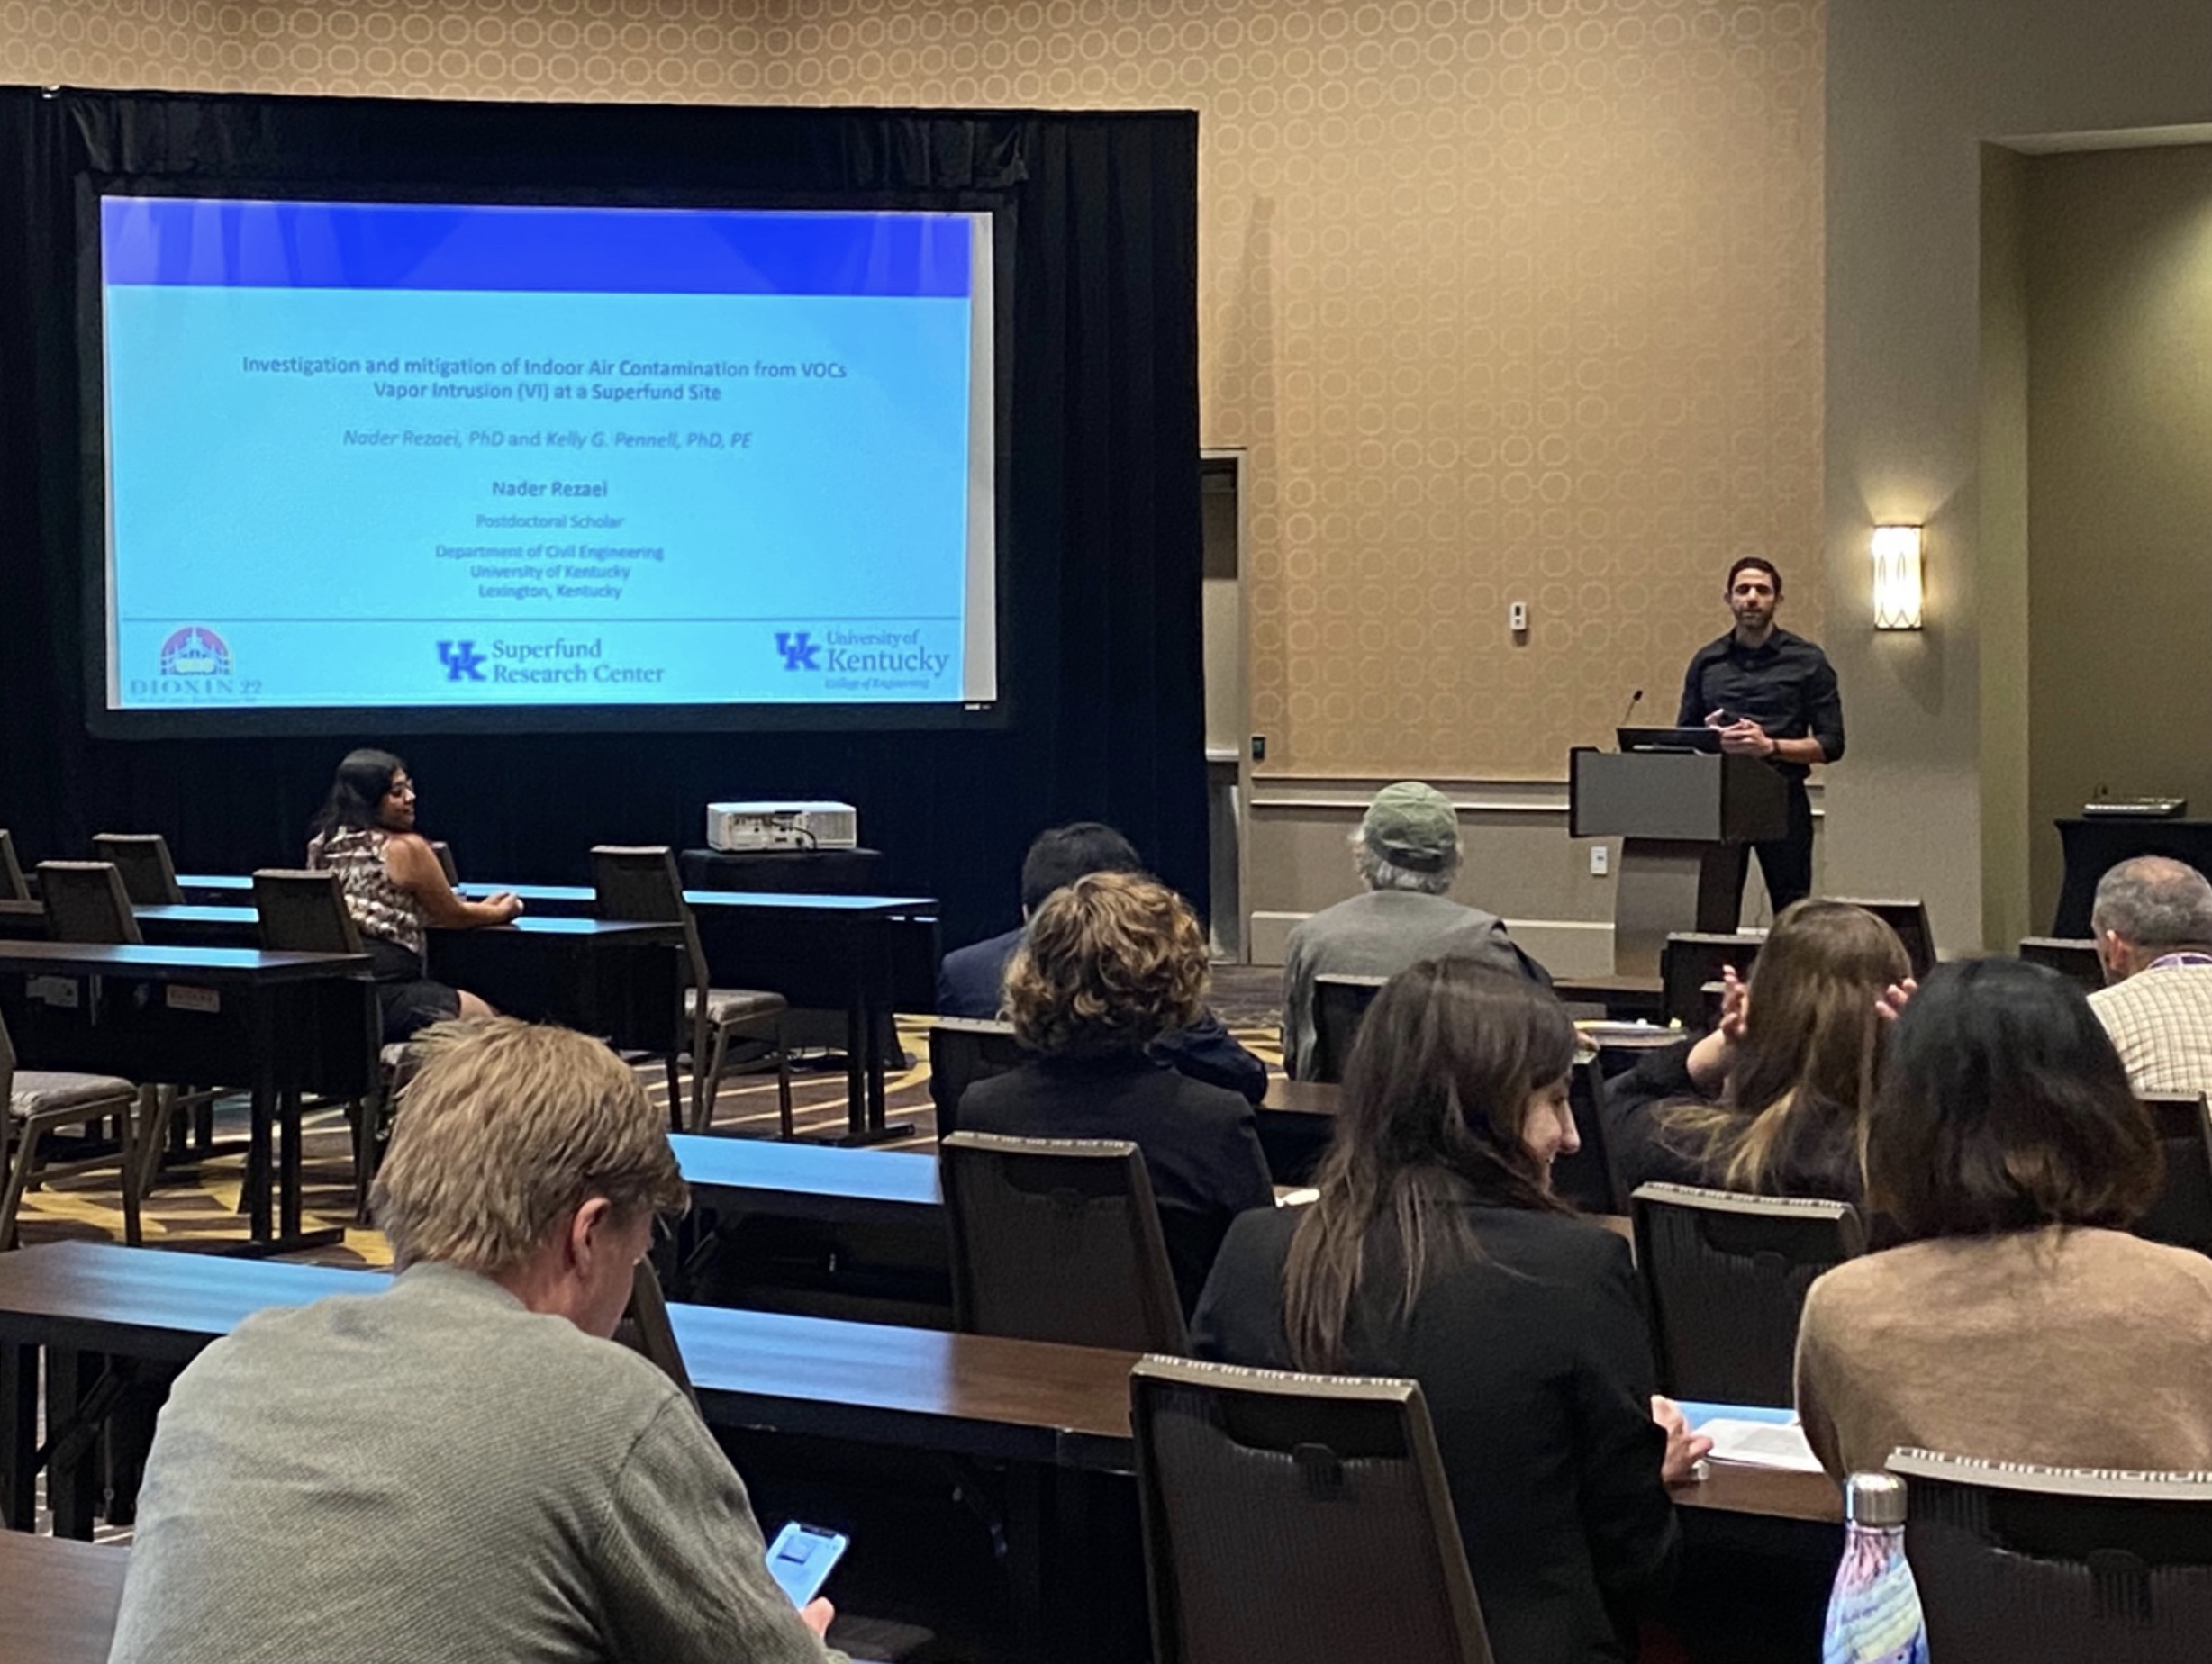 Nader Rezaei, UK Civil Engineering post-doctoral scholar, presenting his research talk entitled “Investigation and Mitigation of Indoor Air Contamination from Volatile Organic Compound Vapor Intrusion (VI) at a Superfund Site.” Co-author: Kelly G. Pennell